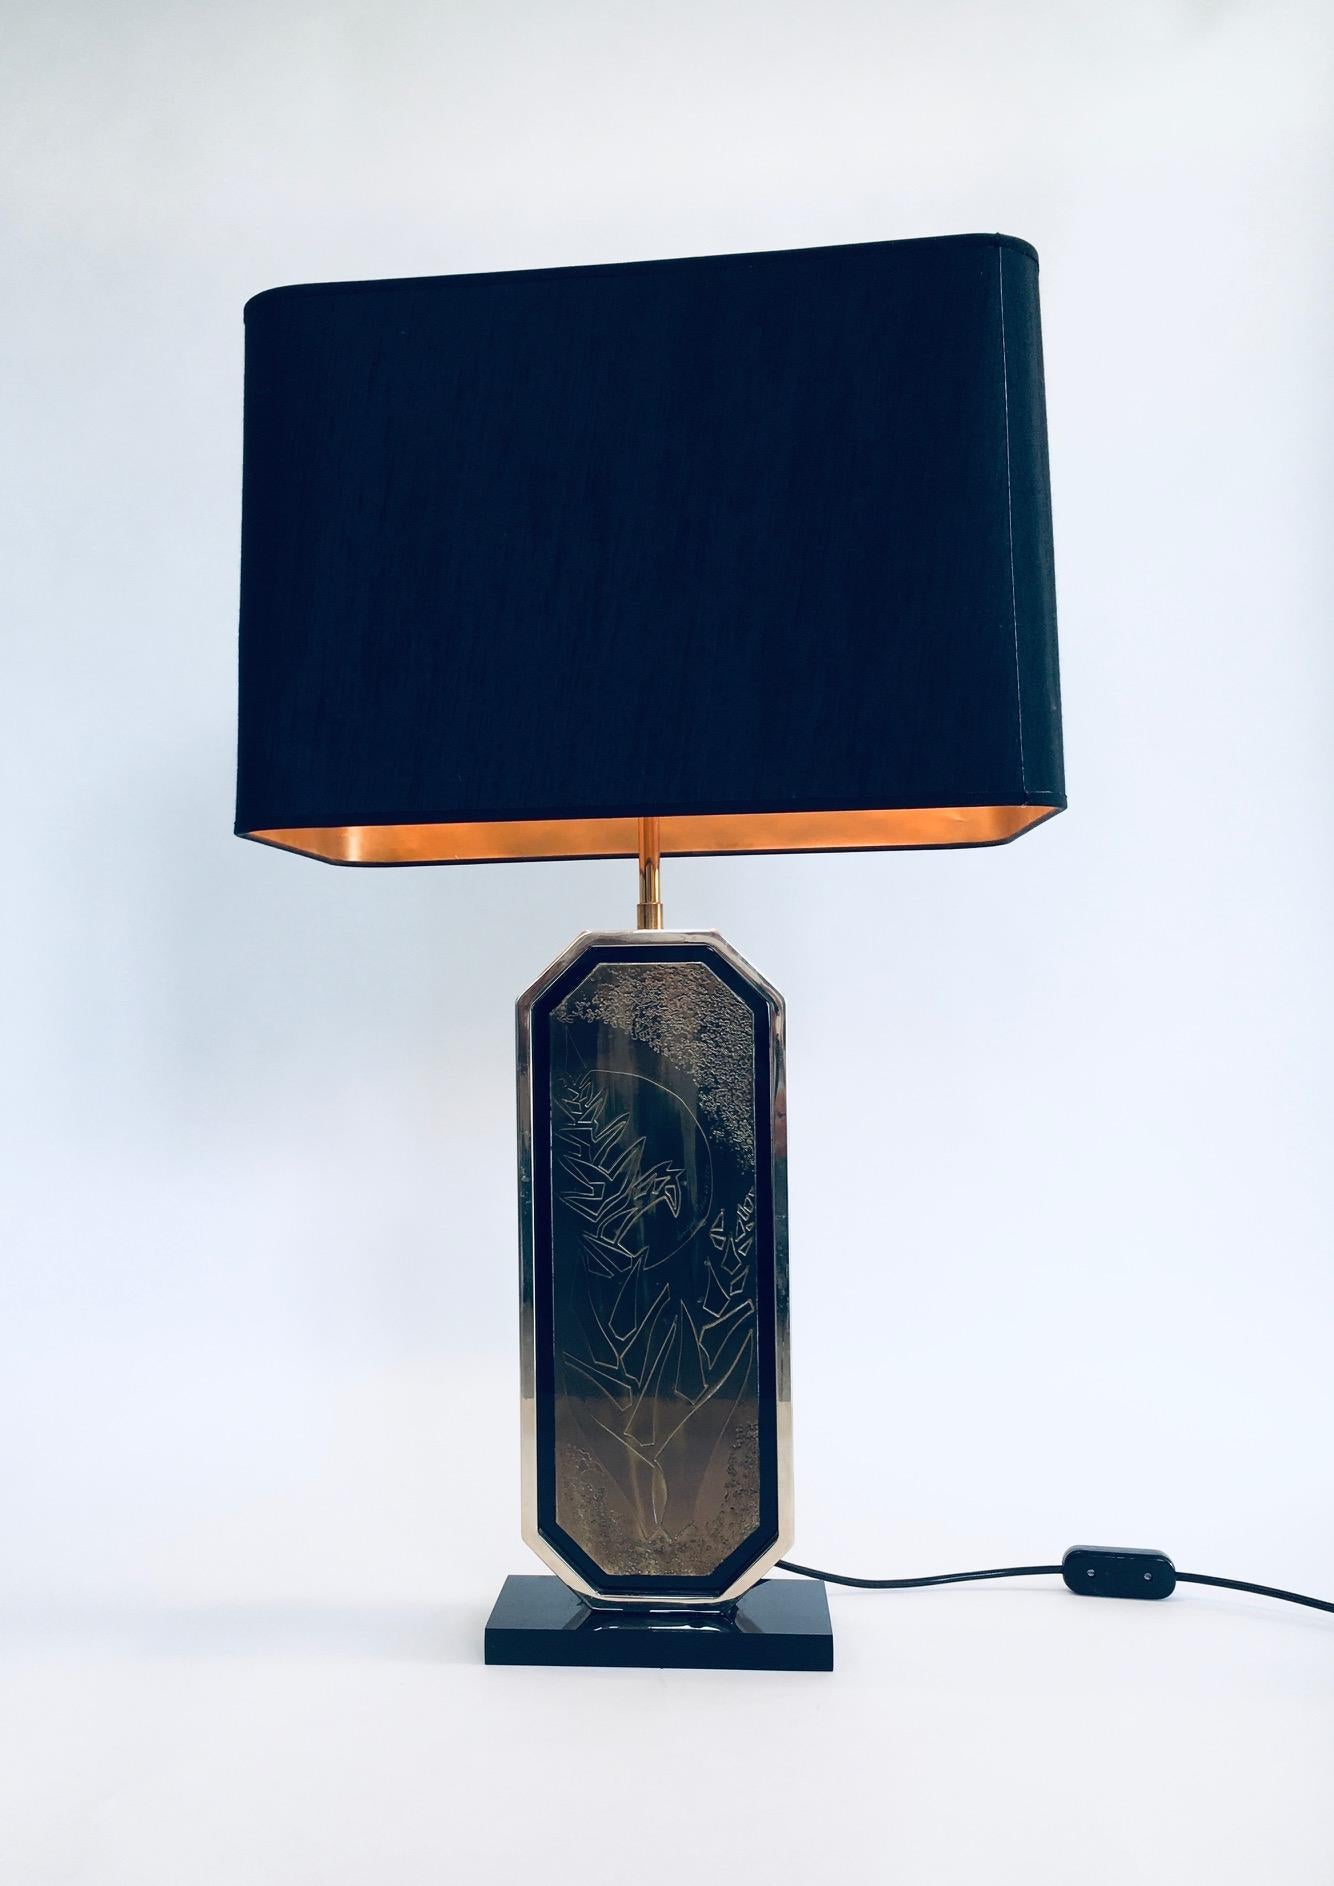 Vintage Postmodern Hollywood Regency Style Design Brass Etched Maho Table Lamp by George Mathias for M2000, made in Belgium in the 1970's. Designo Maho, numbered 65/250. 23 carat gold plated brass etched with black perspex. Black with gold inner